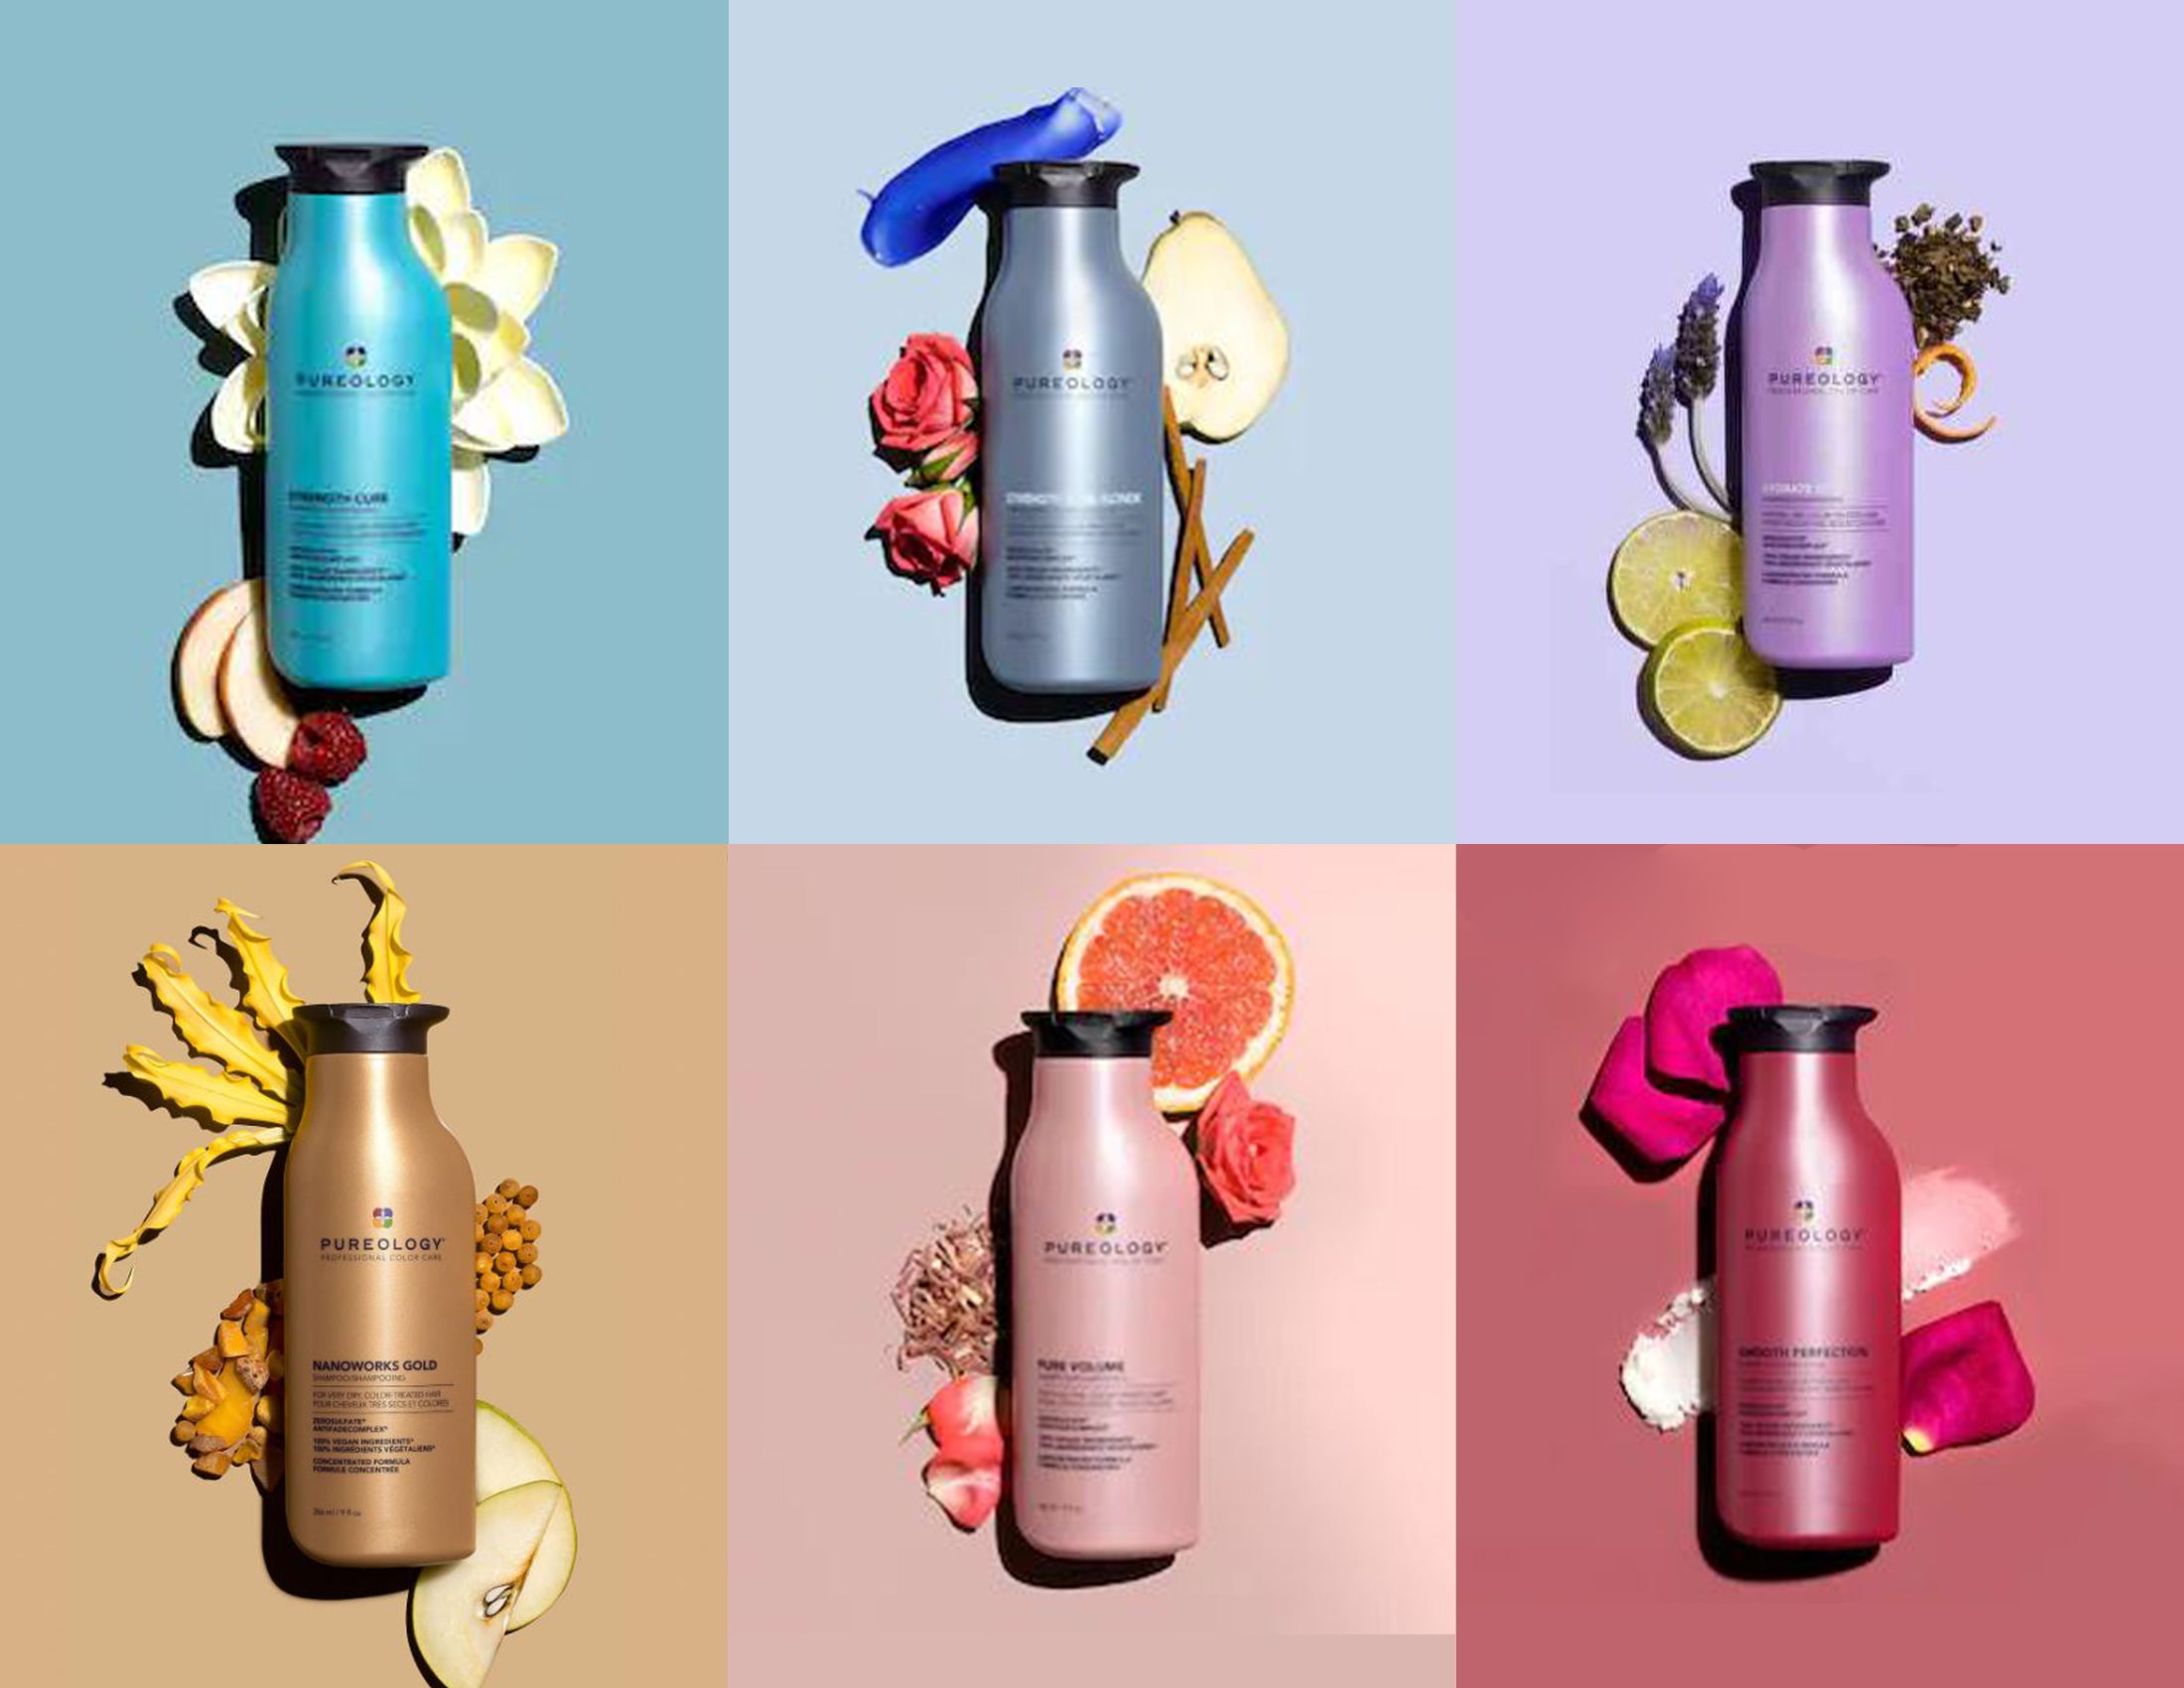 L'Oréal's Pureology: The Colorful Beauty of Diversity